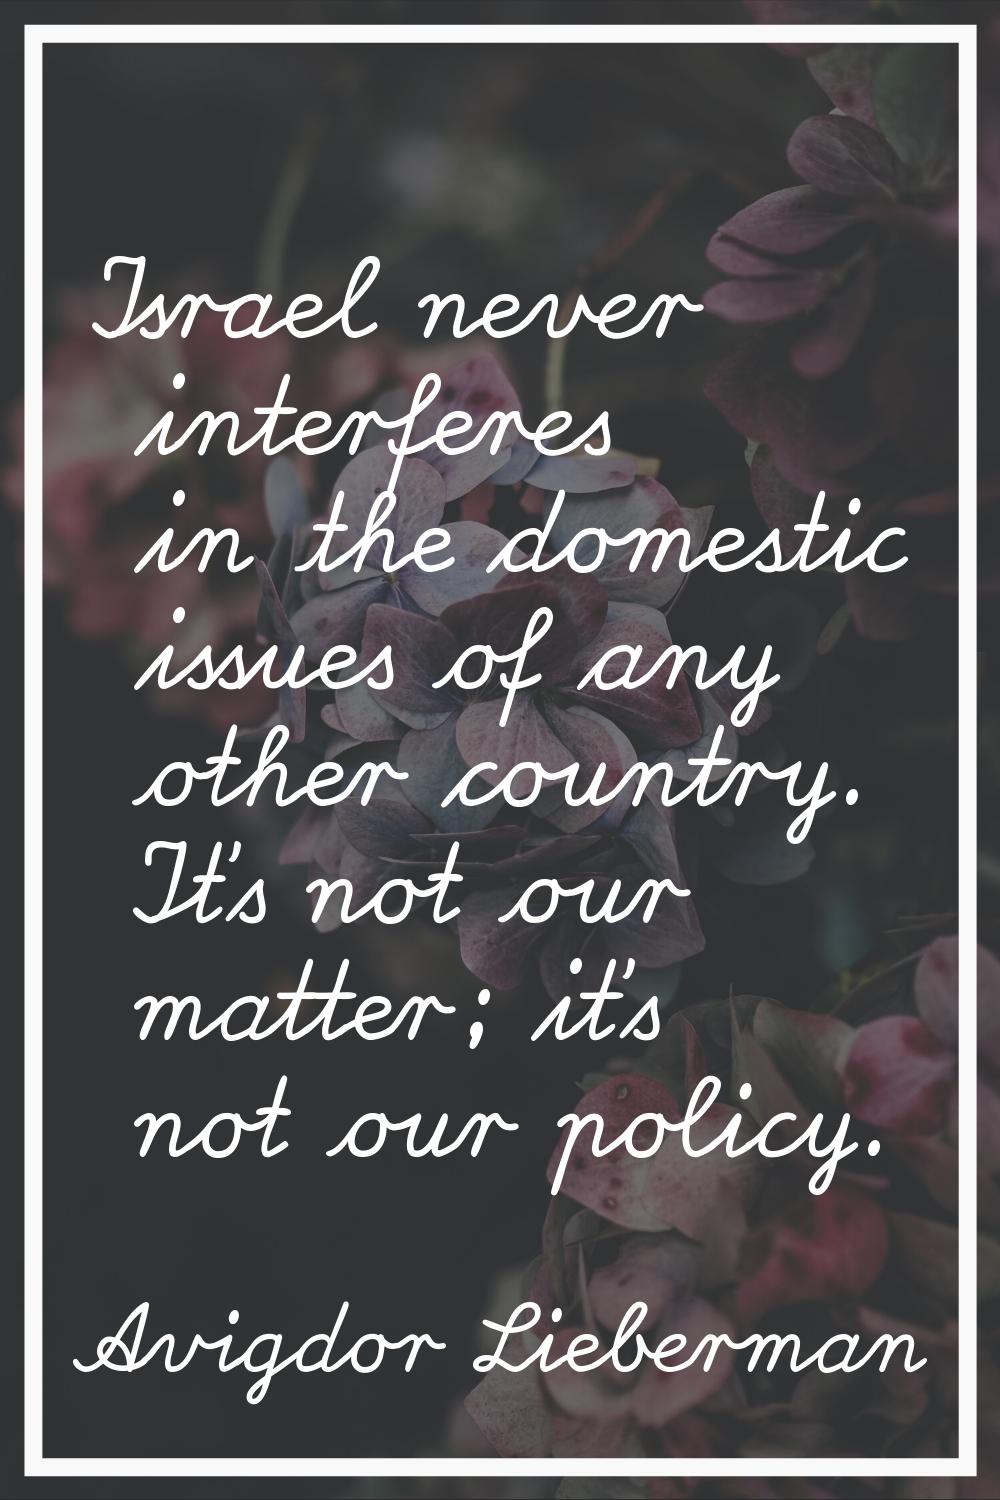 Israel never interferes in the domestic issues of any other country. It's not our matter; it's not 